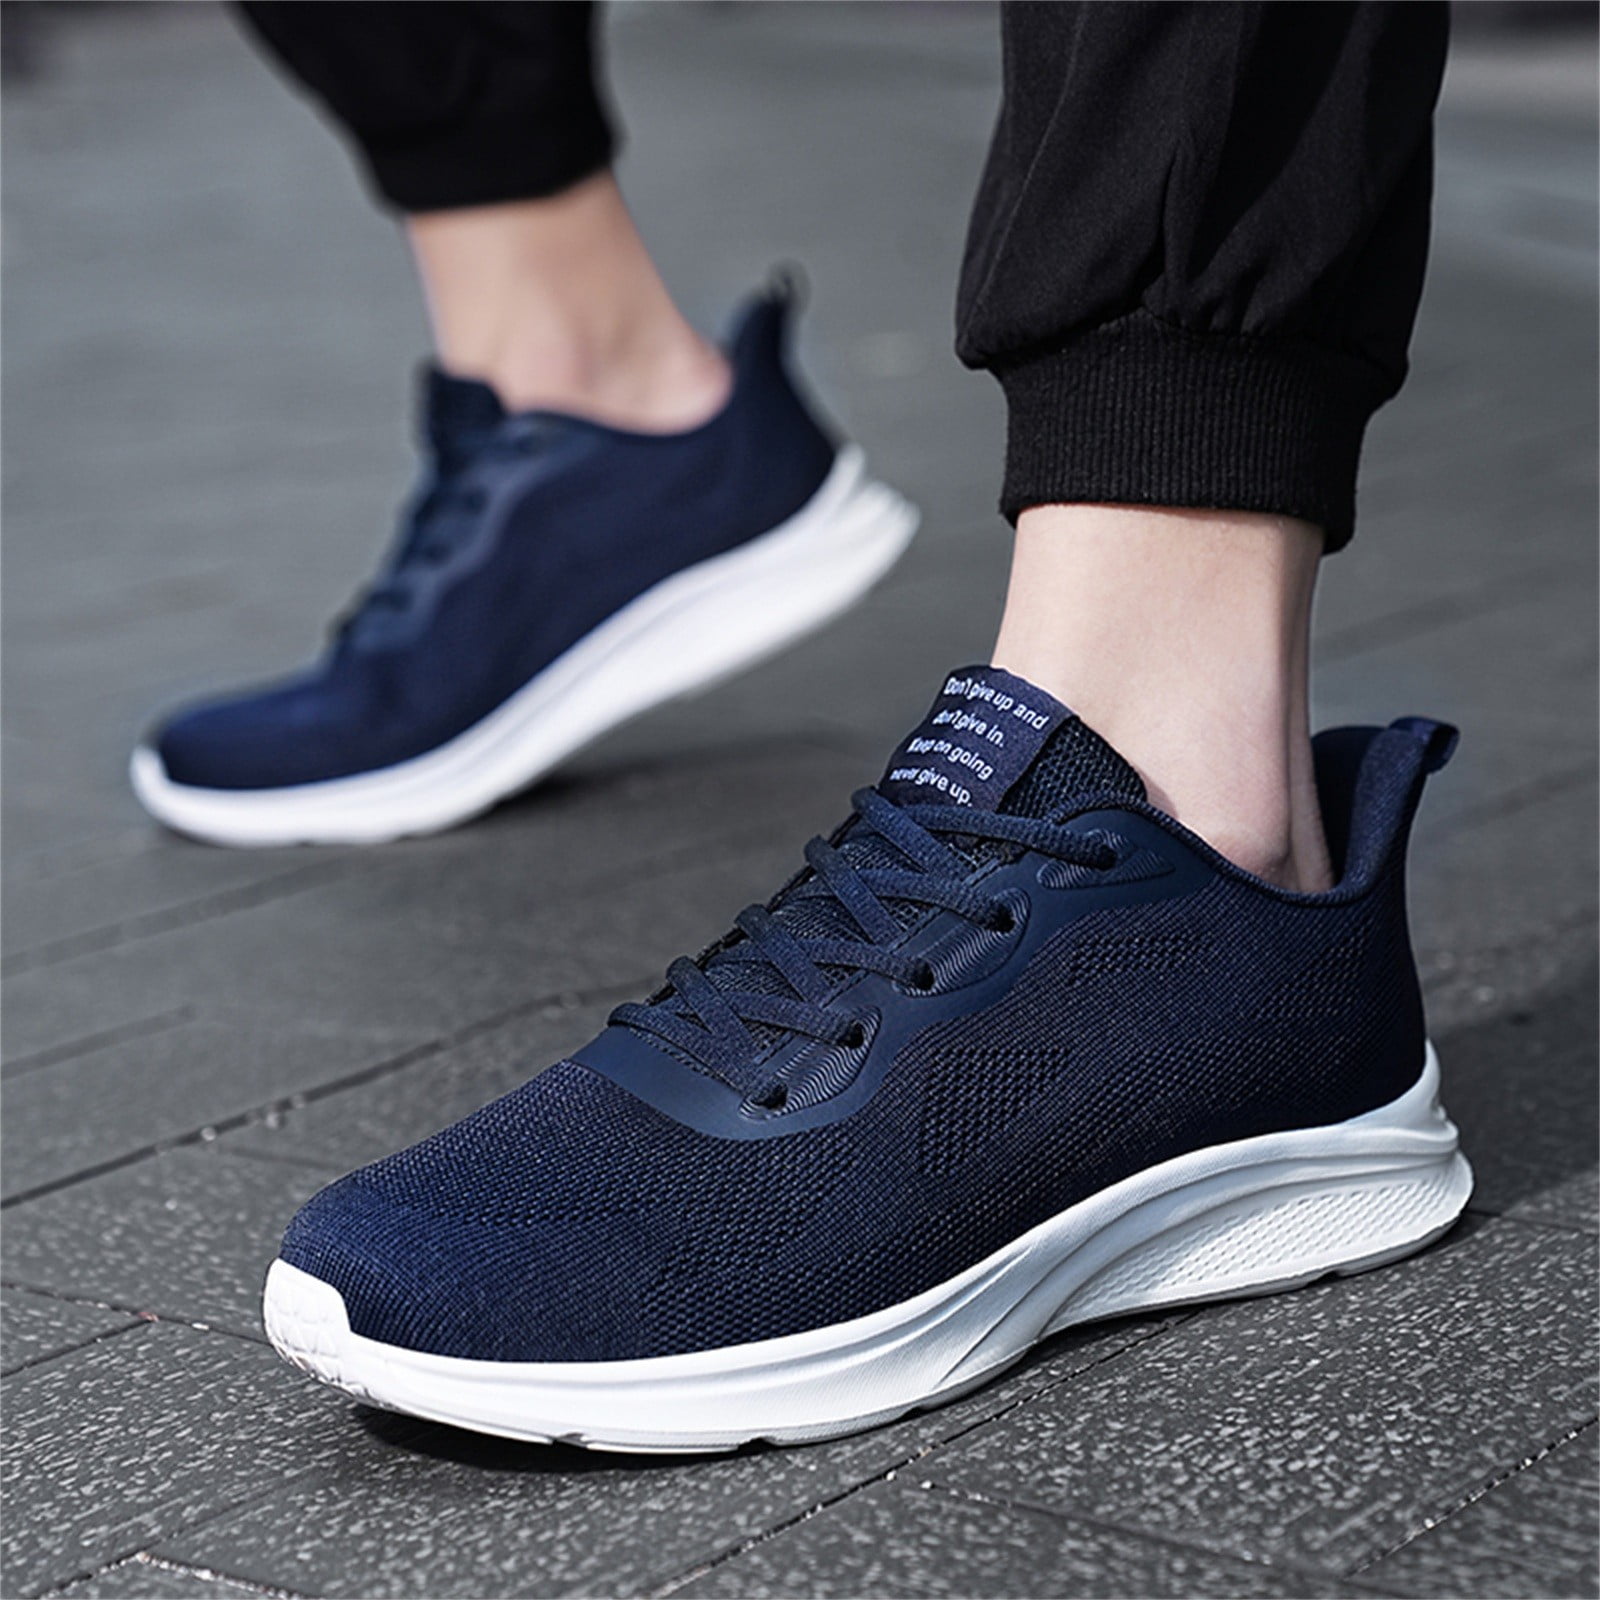 Top more than 215 blue fashion sneakers latest